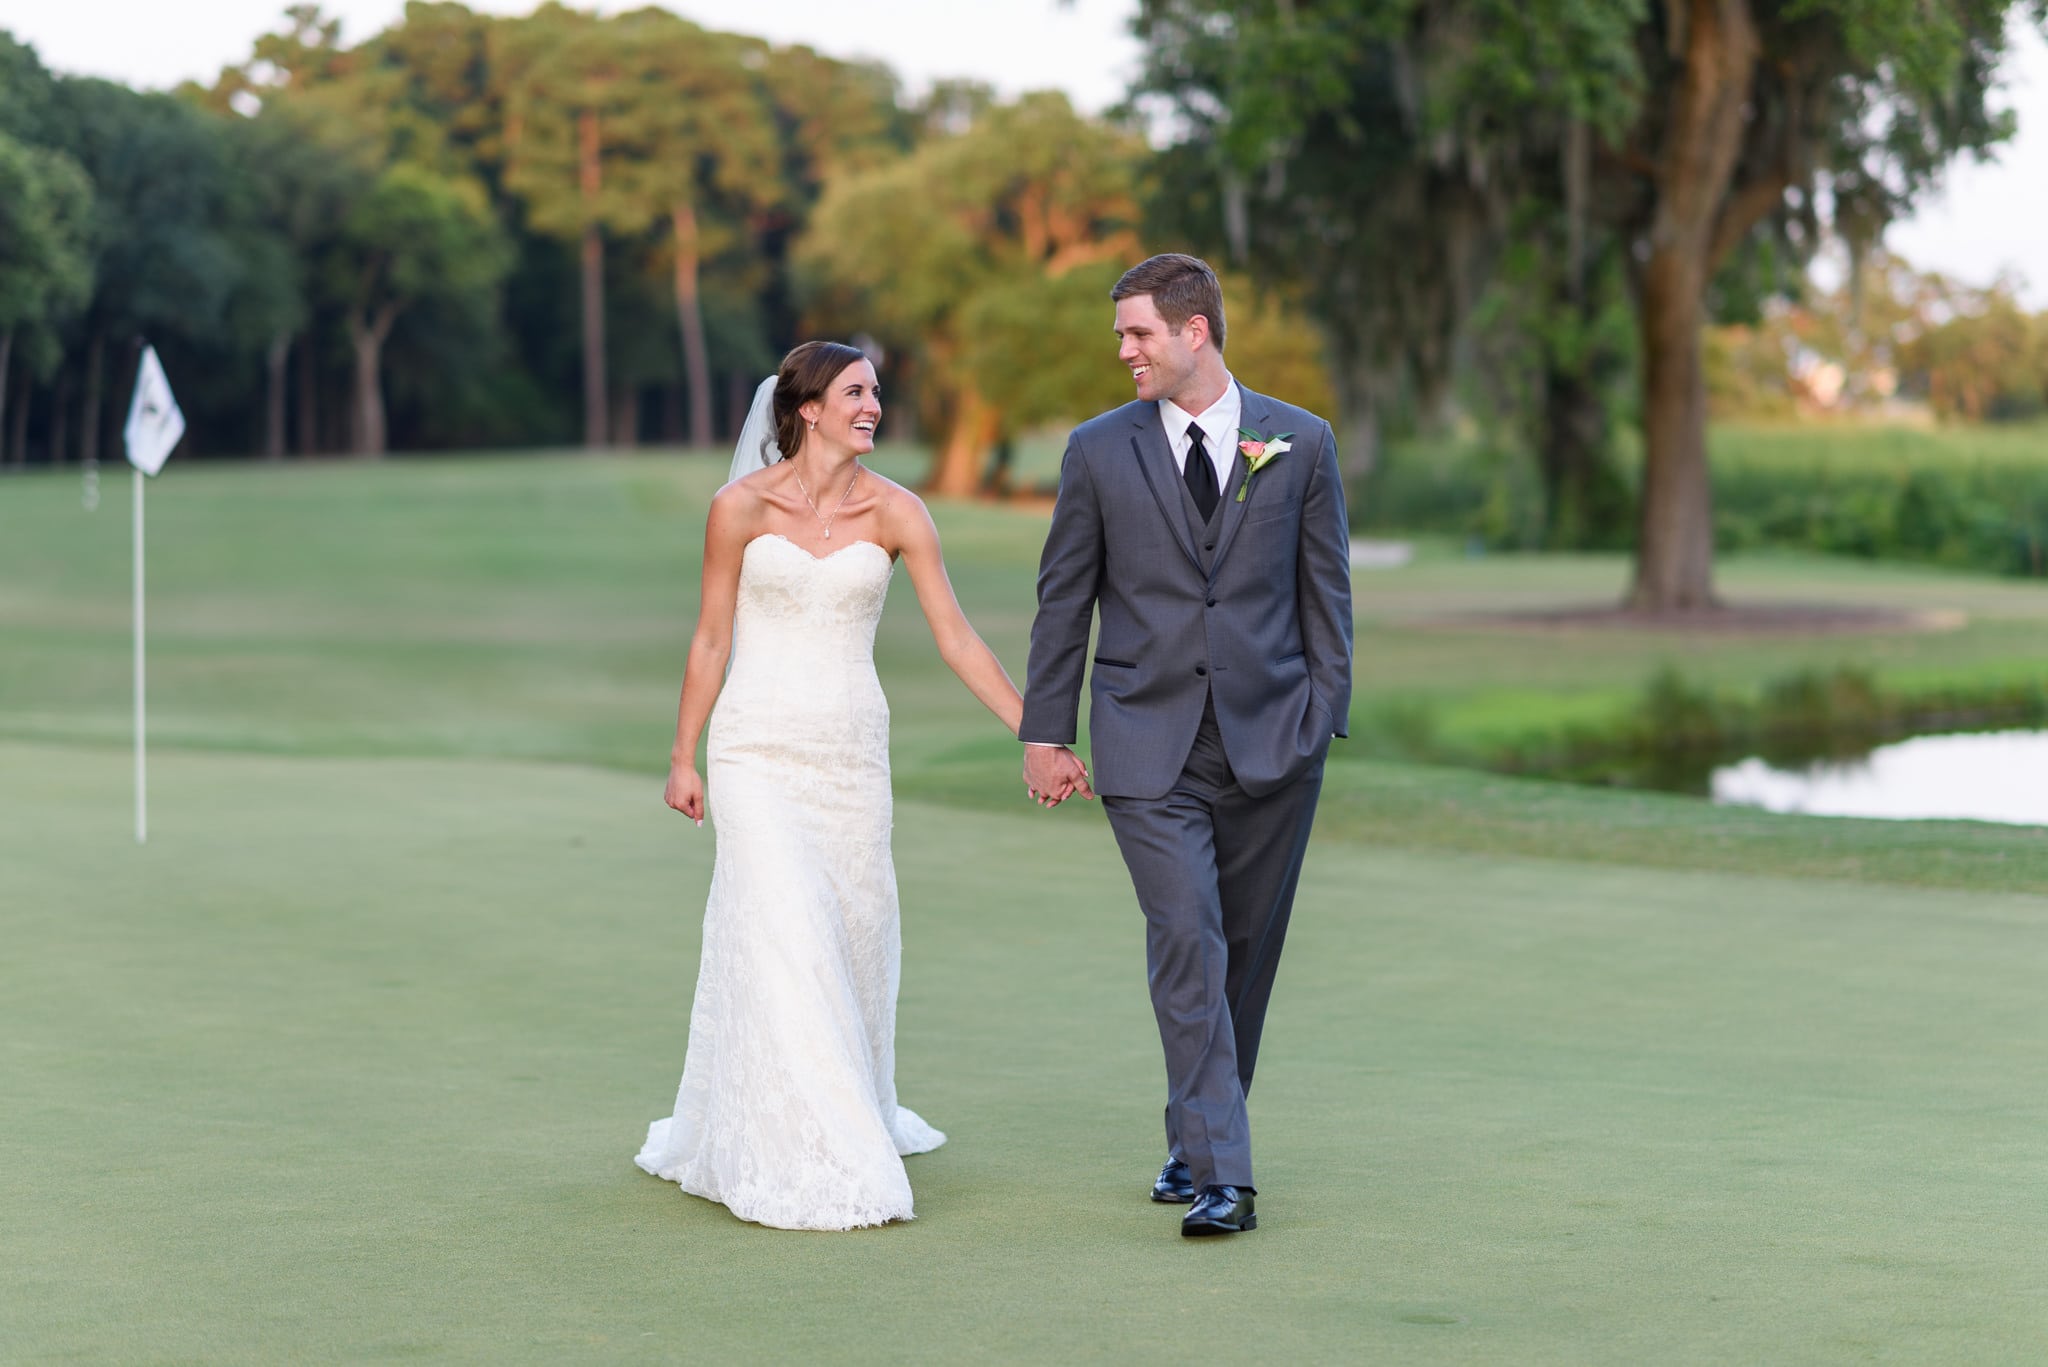 Holding hands walking down golf course - Pawleys Plantation